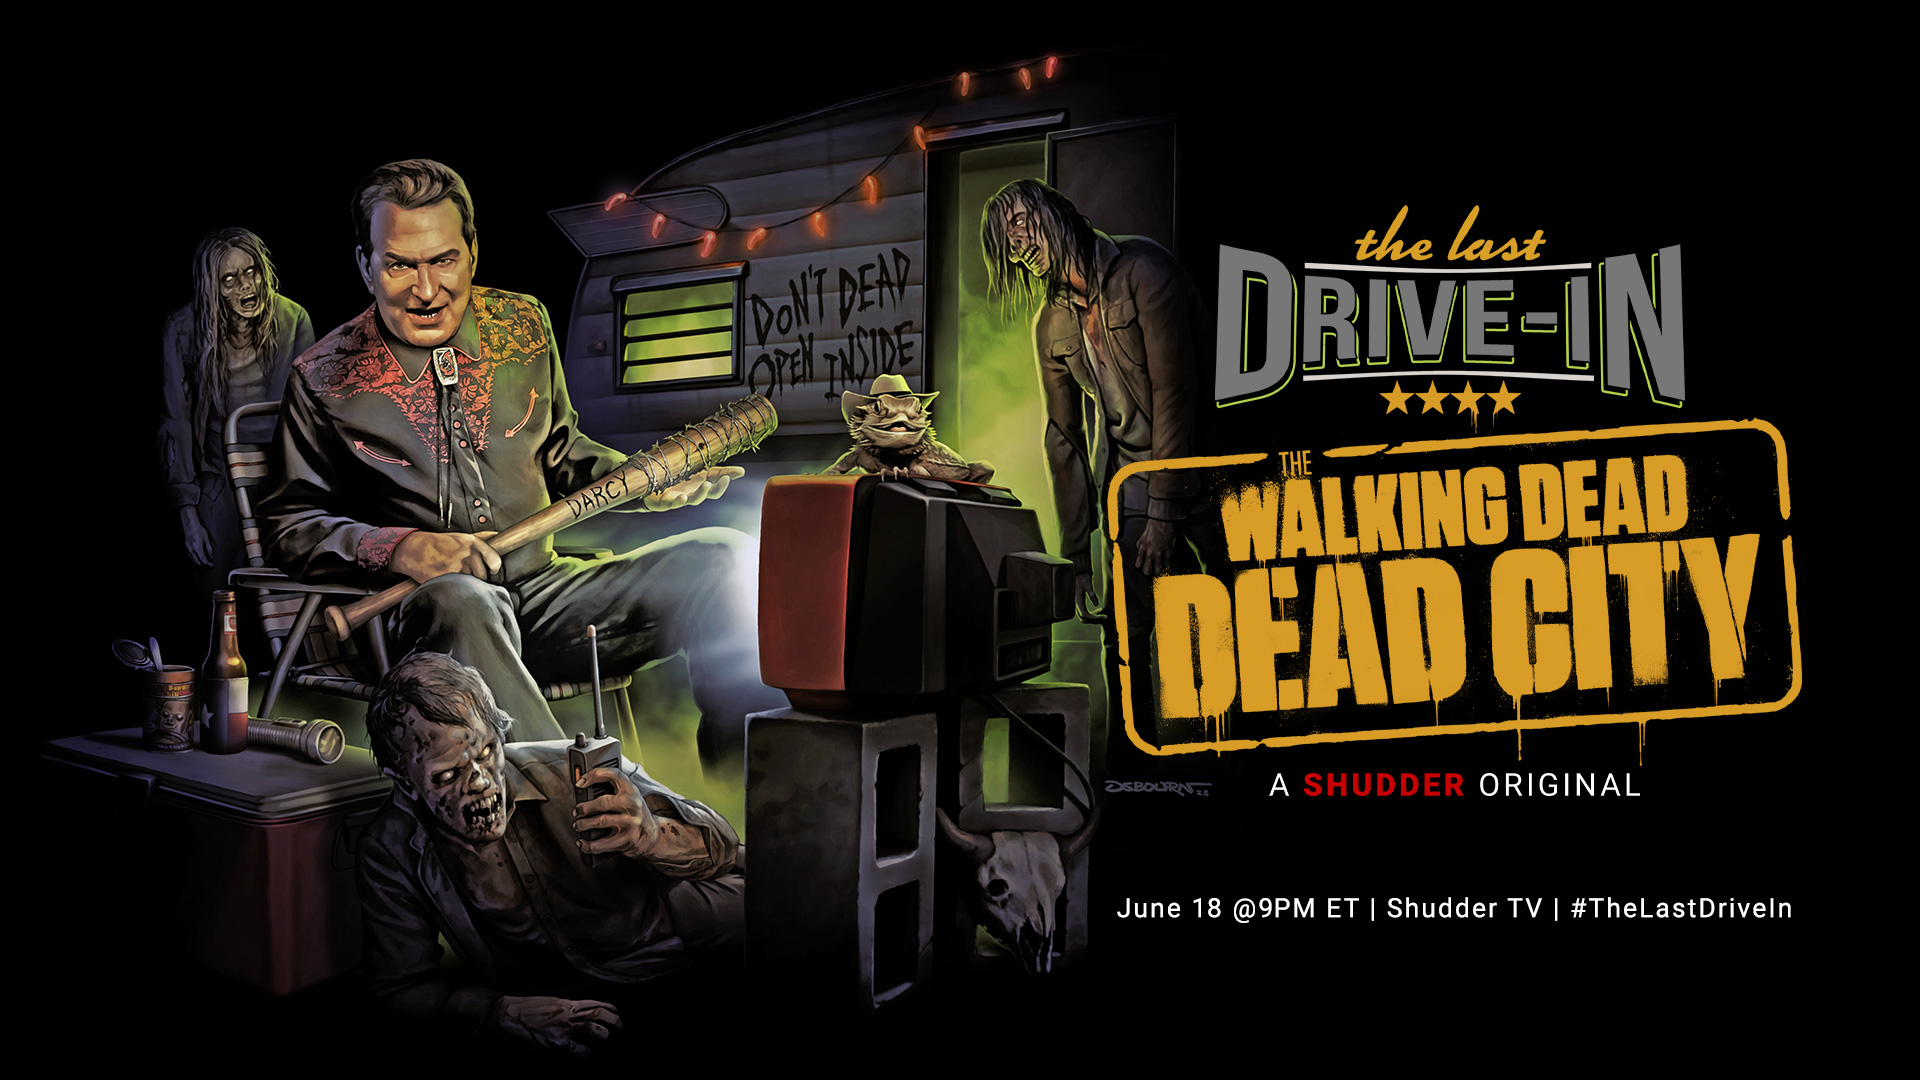 the-walking-dead-dead-city-collides-with-the-last-drive-in-this-sunday